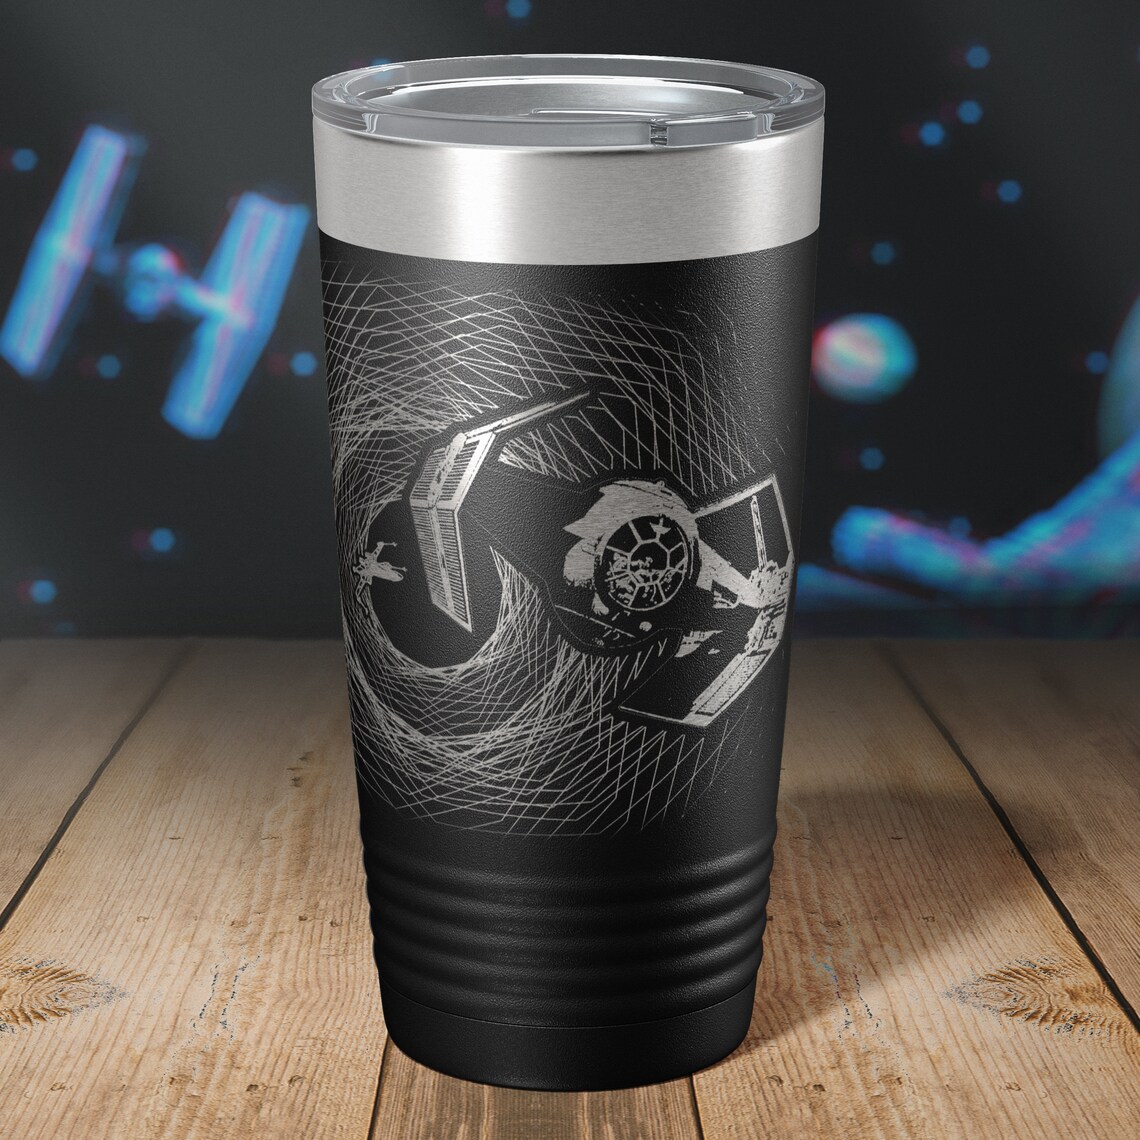 Best Laser Engravers for Tumblers - Which Type is Your Favorite?